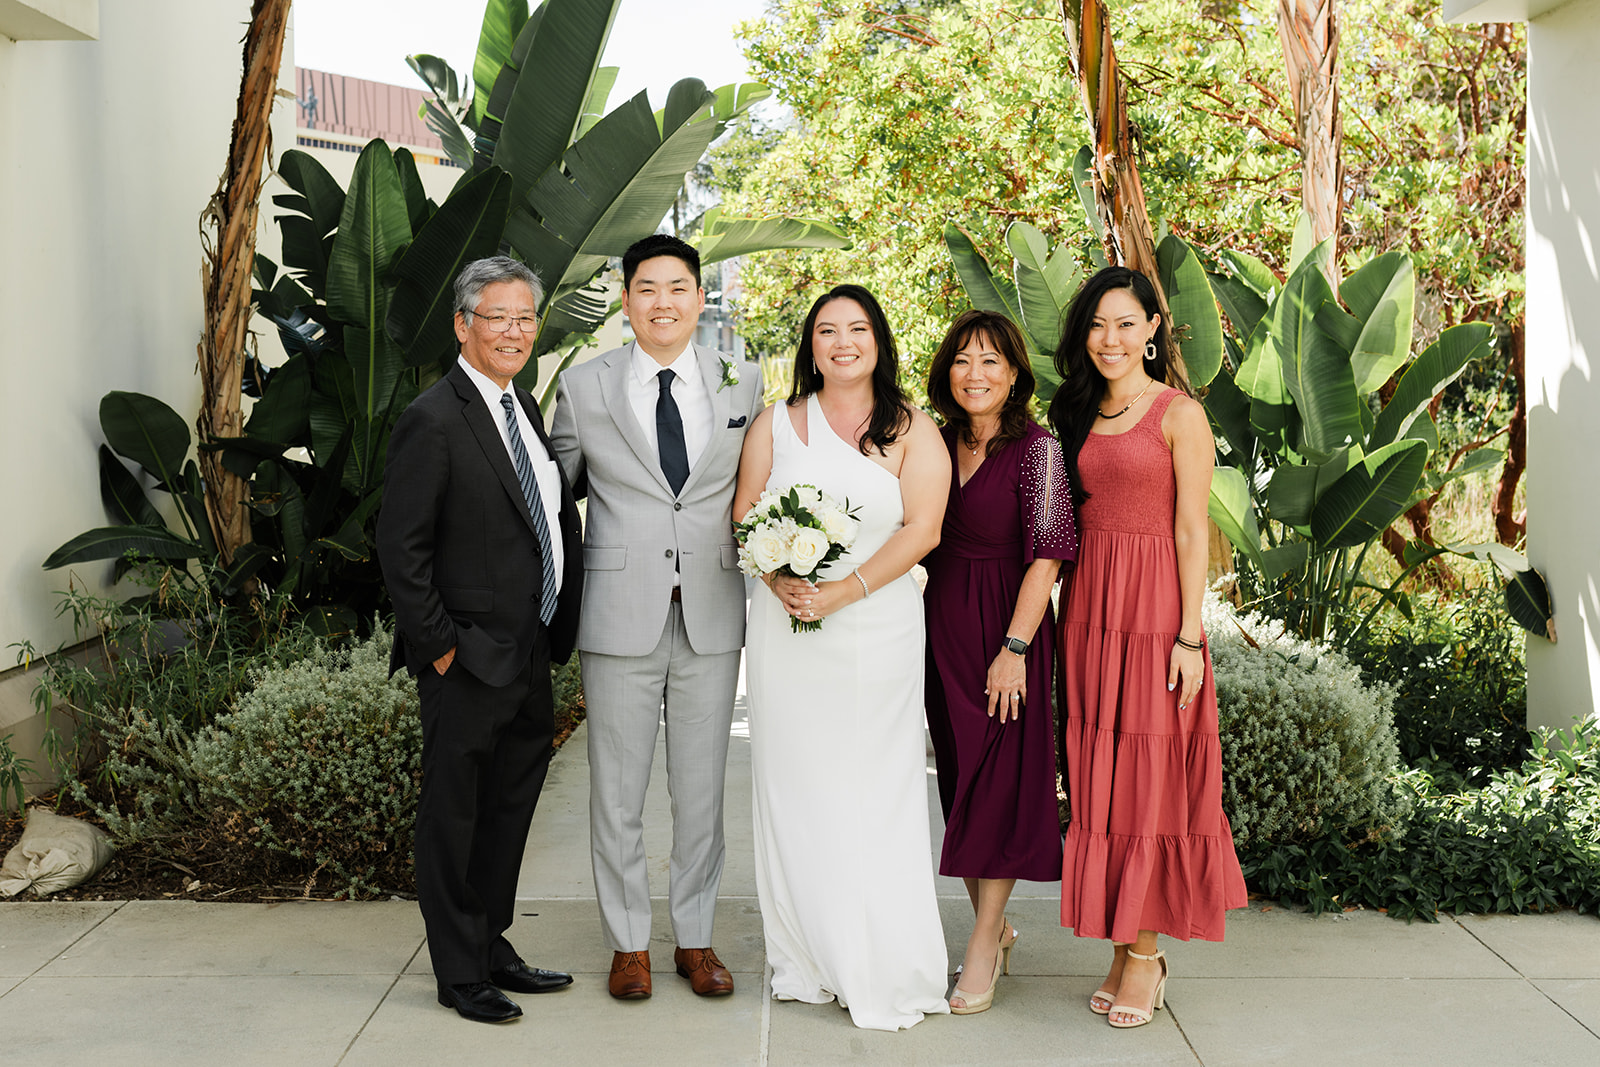 Gorgeous family wedding portaits at a couples Beverly Hills City Hall elopement